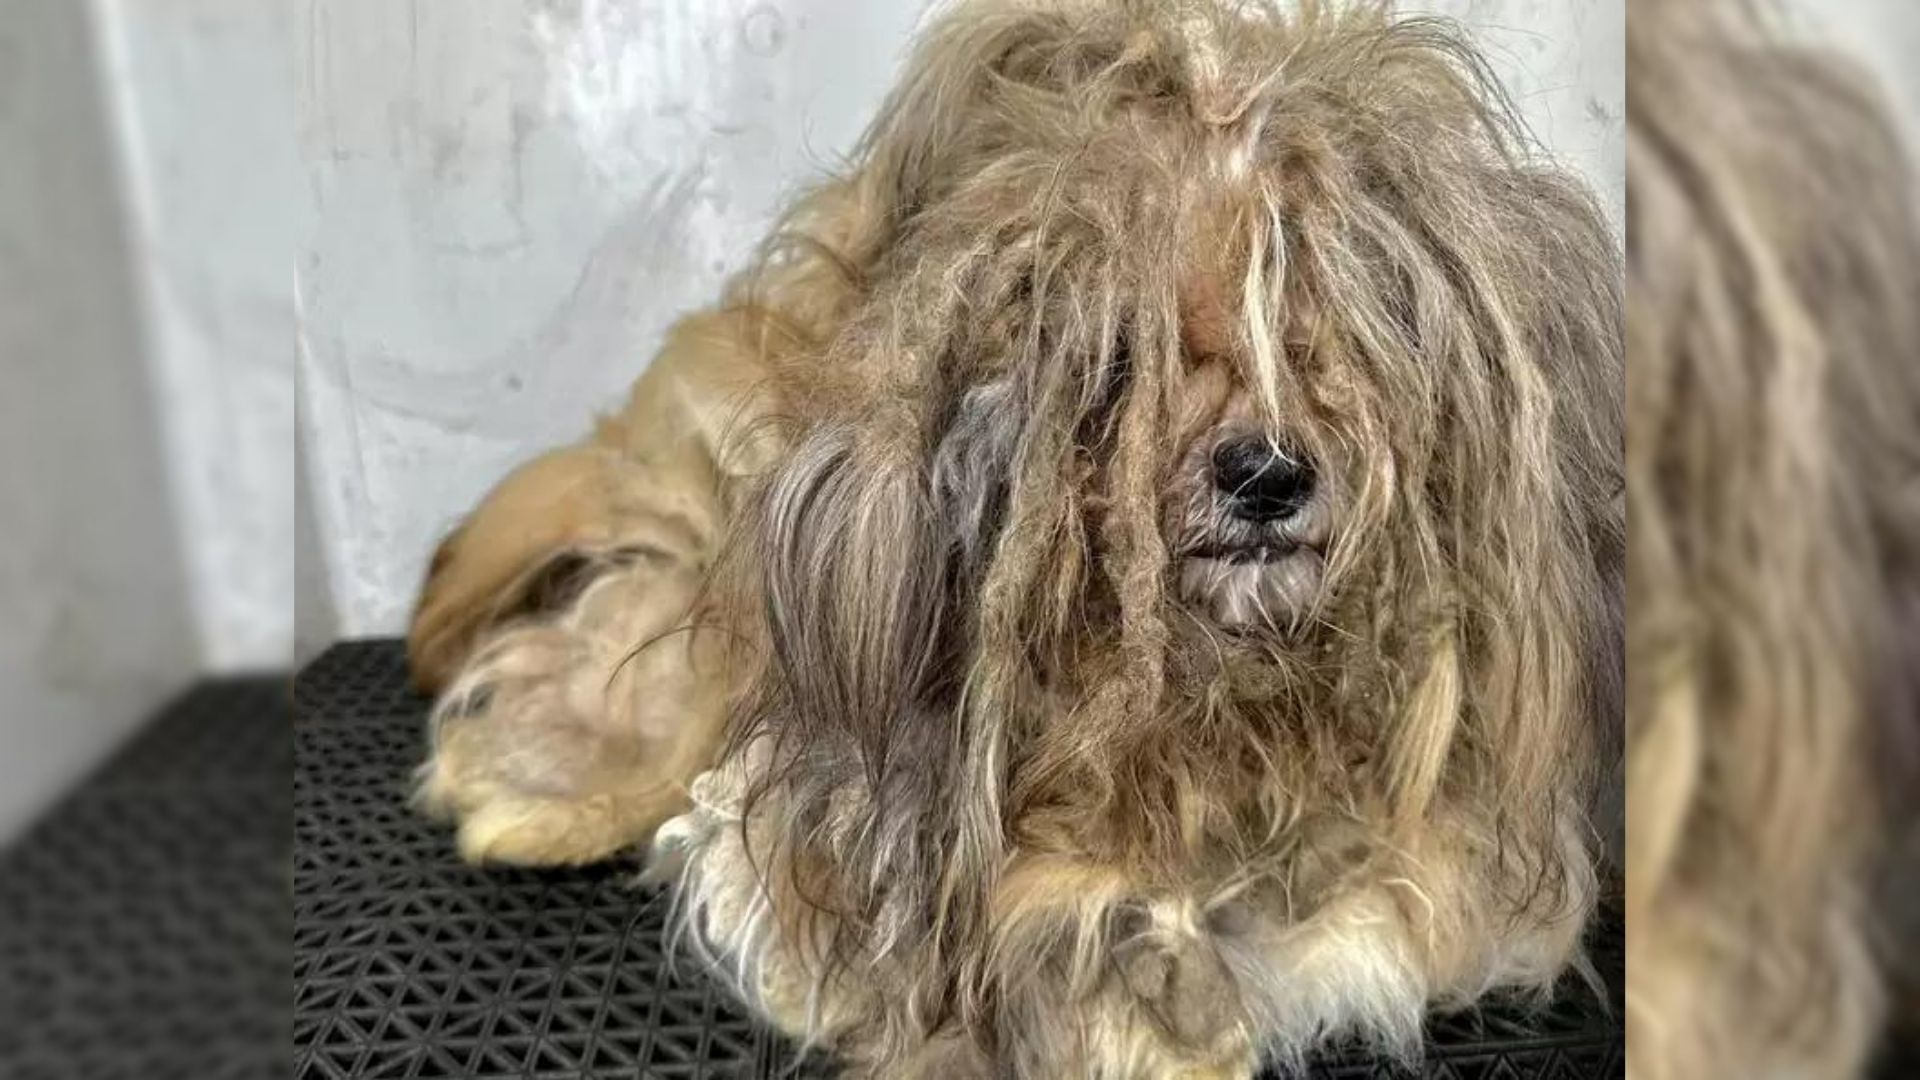 Matted Dog Who Looked Like A Rug Gets The Transformation Of A Lifetime And Becomes A Brand New Dog